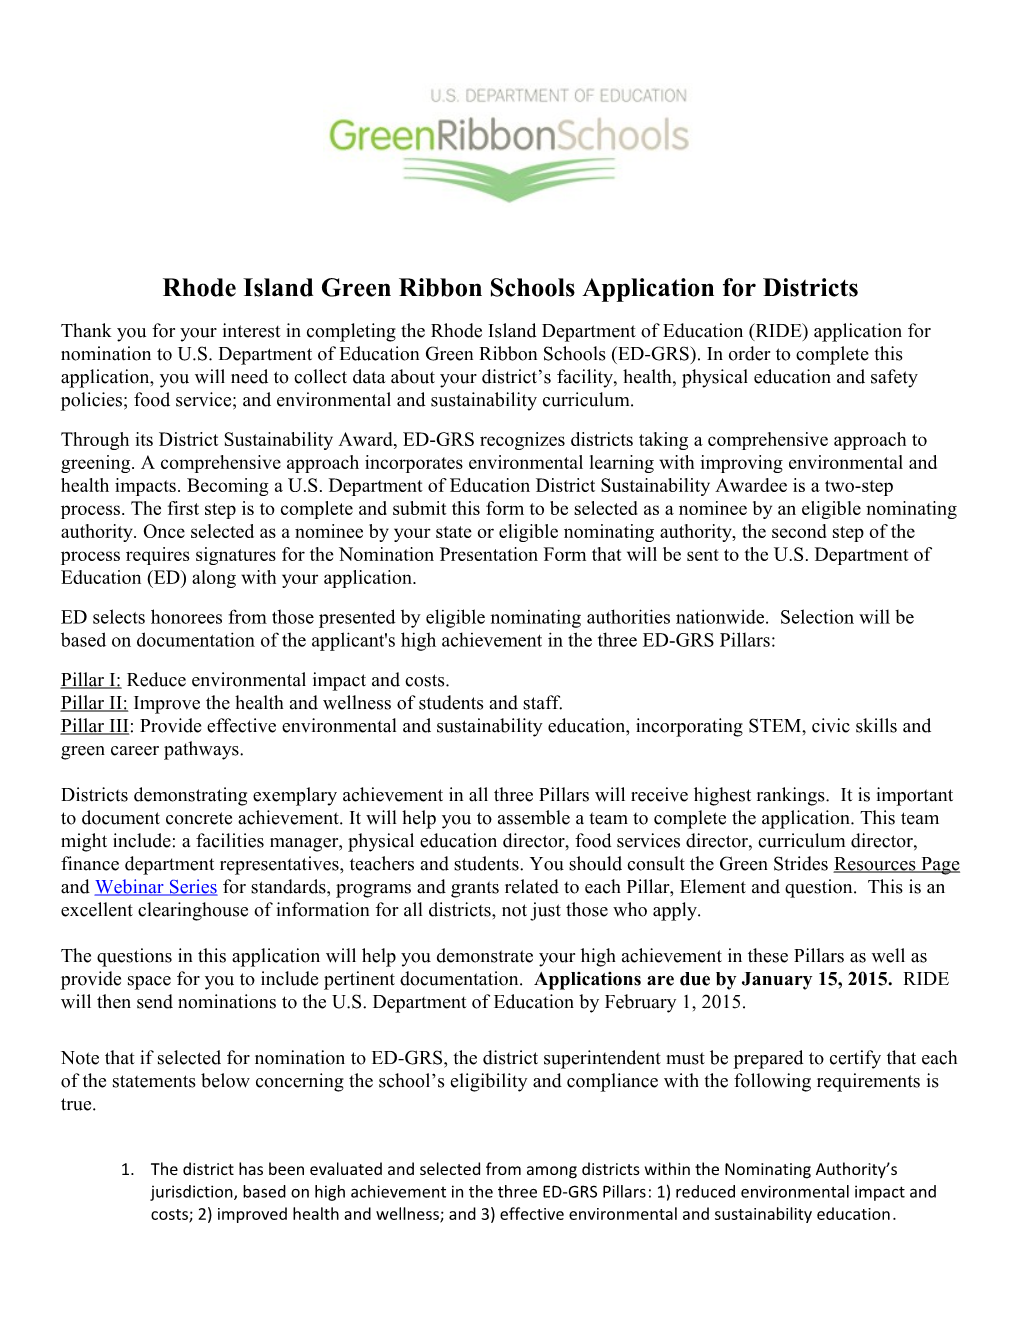 Rhode Island Green Ribbon Schools Application for Districts